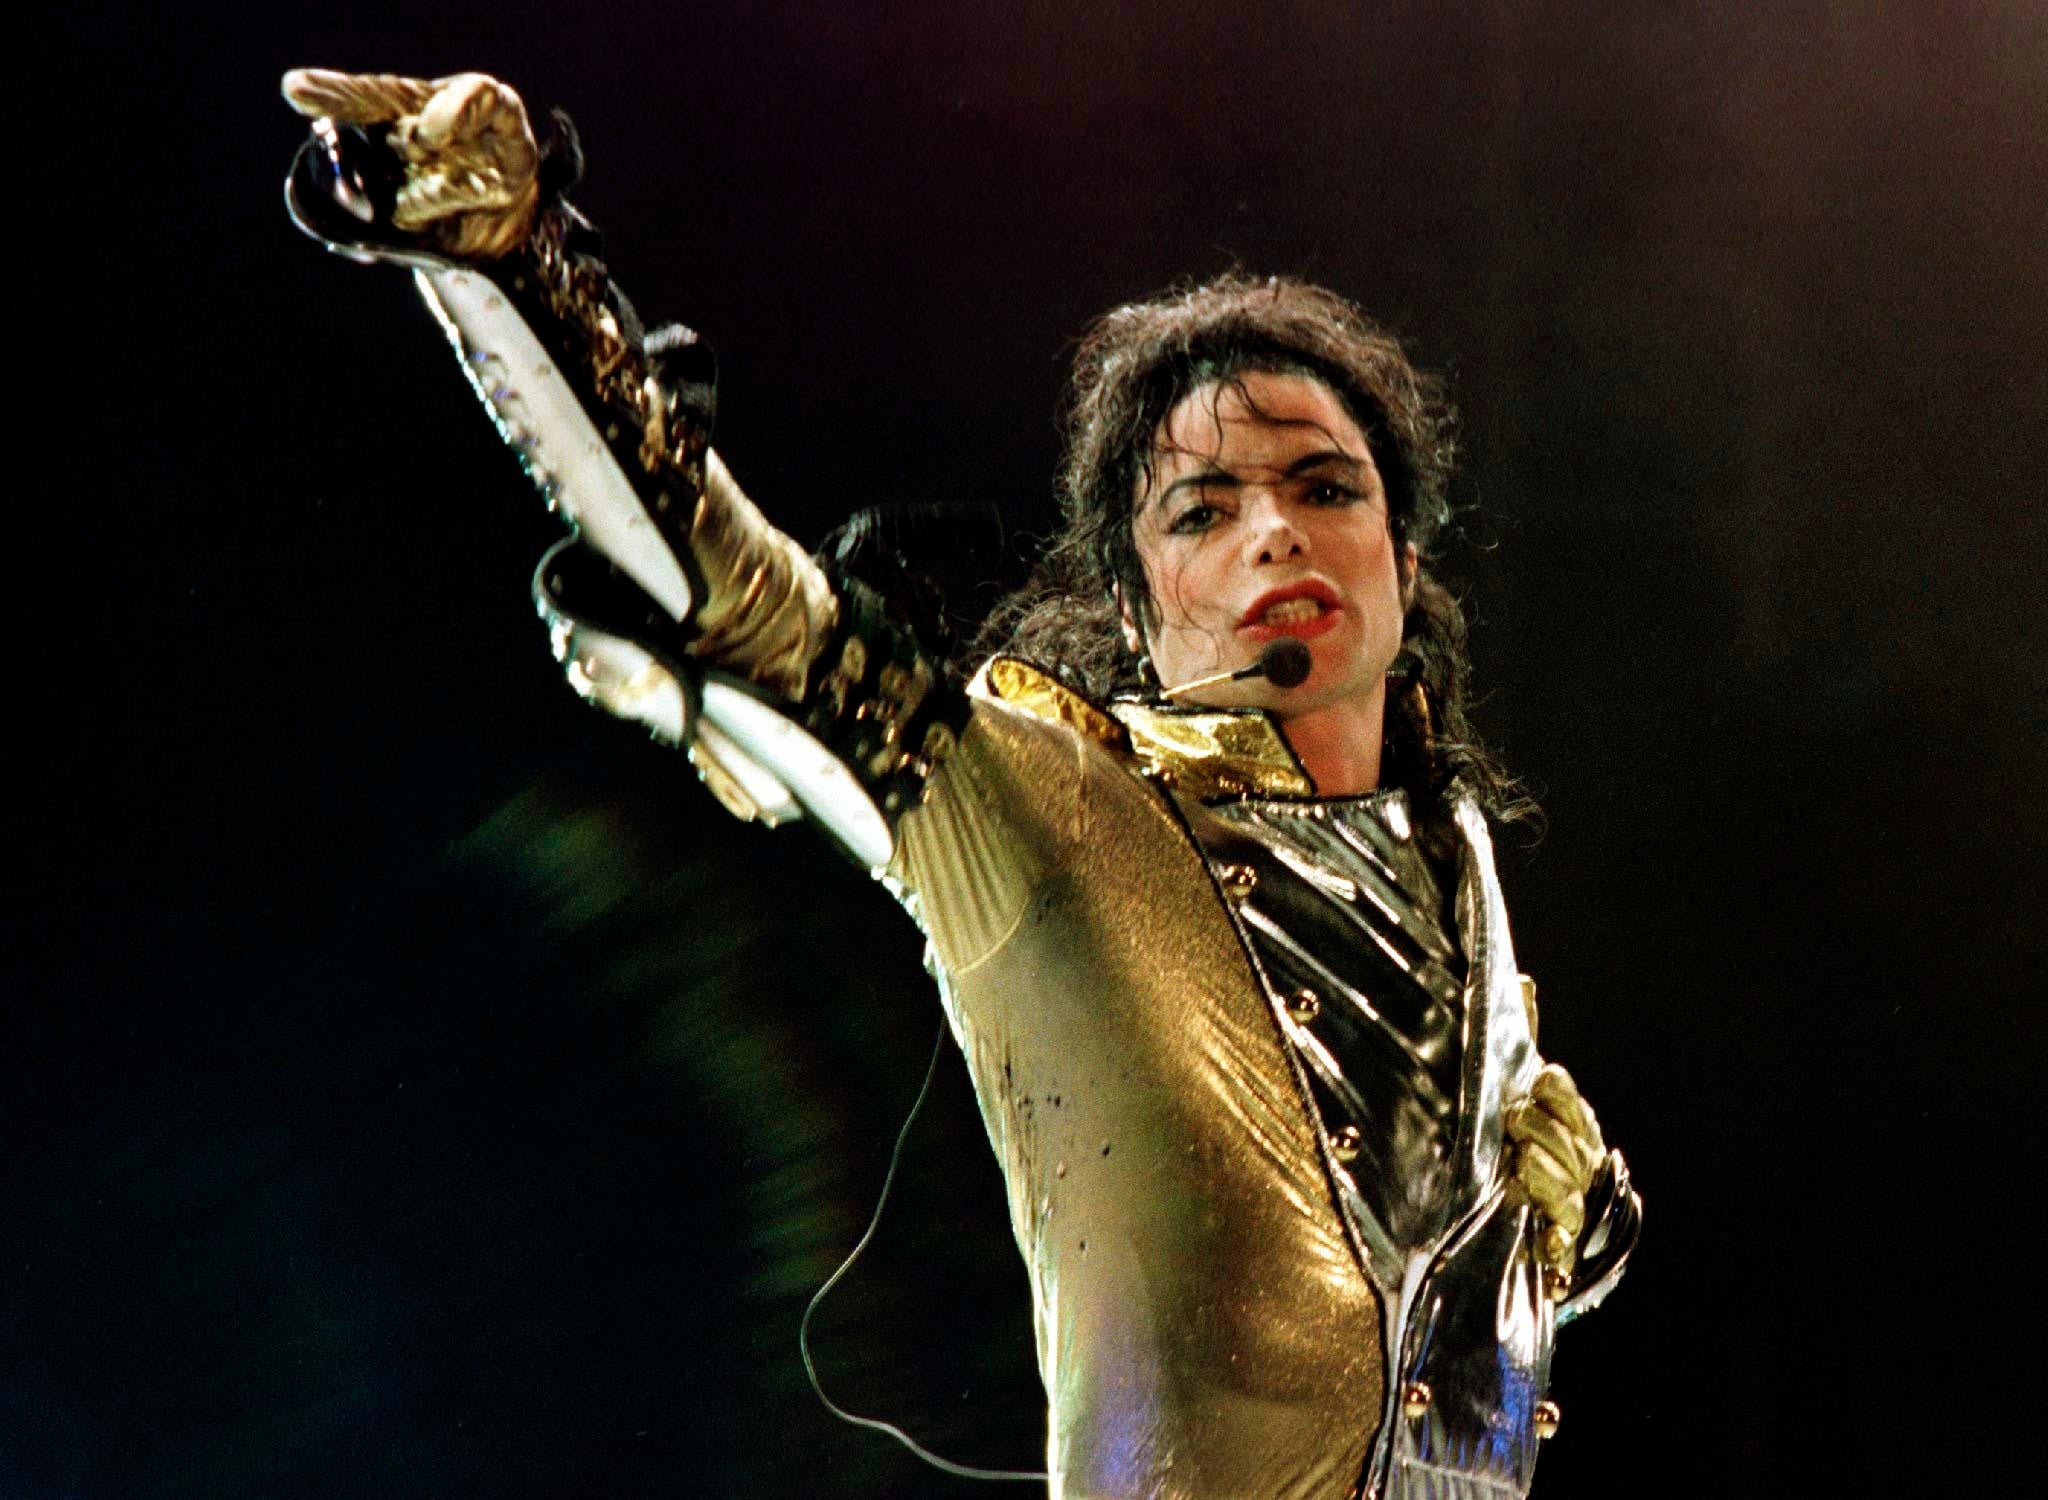 Michael Jackson, performing in 1997, purchased Neverland Ranch nearly a decade earlier from a developer after falling in love with the property during a video shoot with Paul McCartney